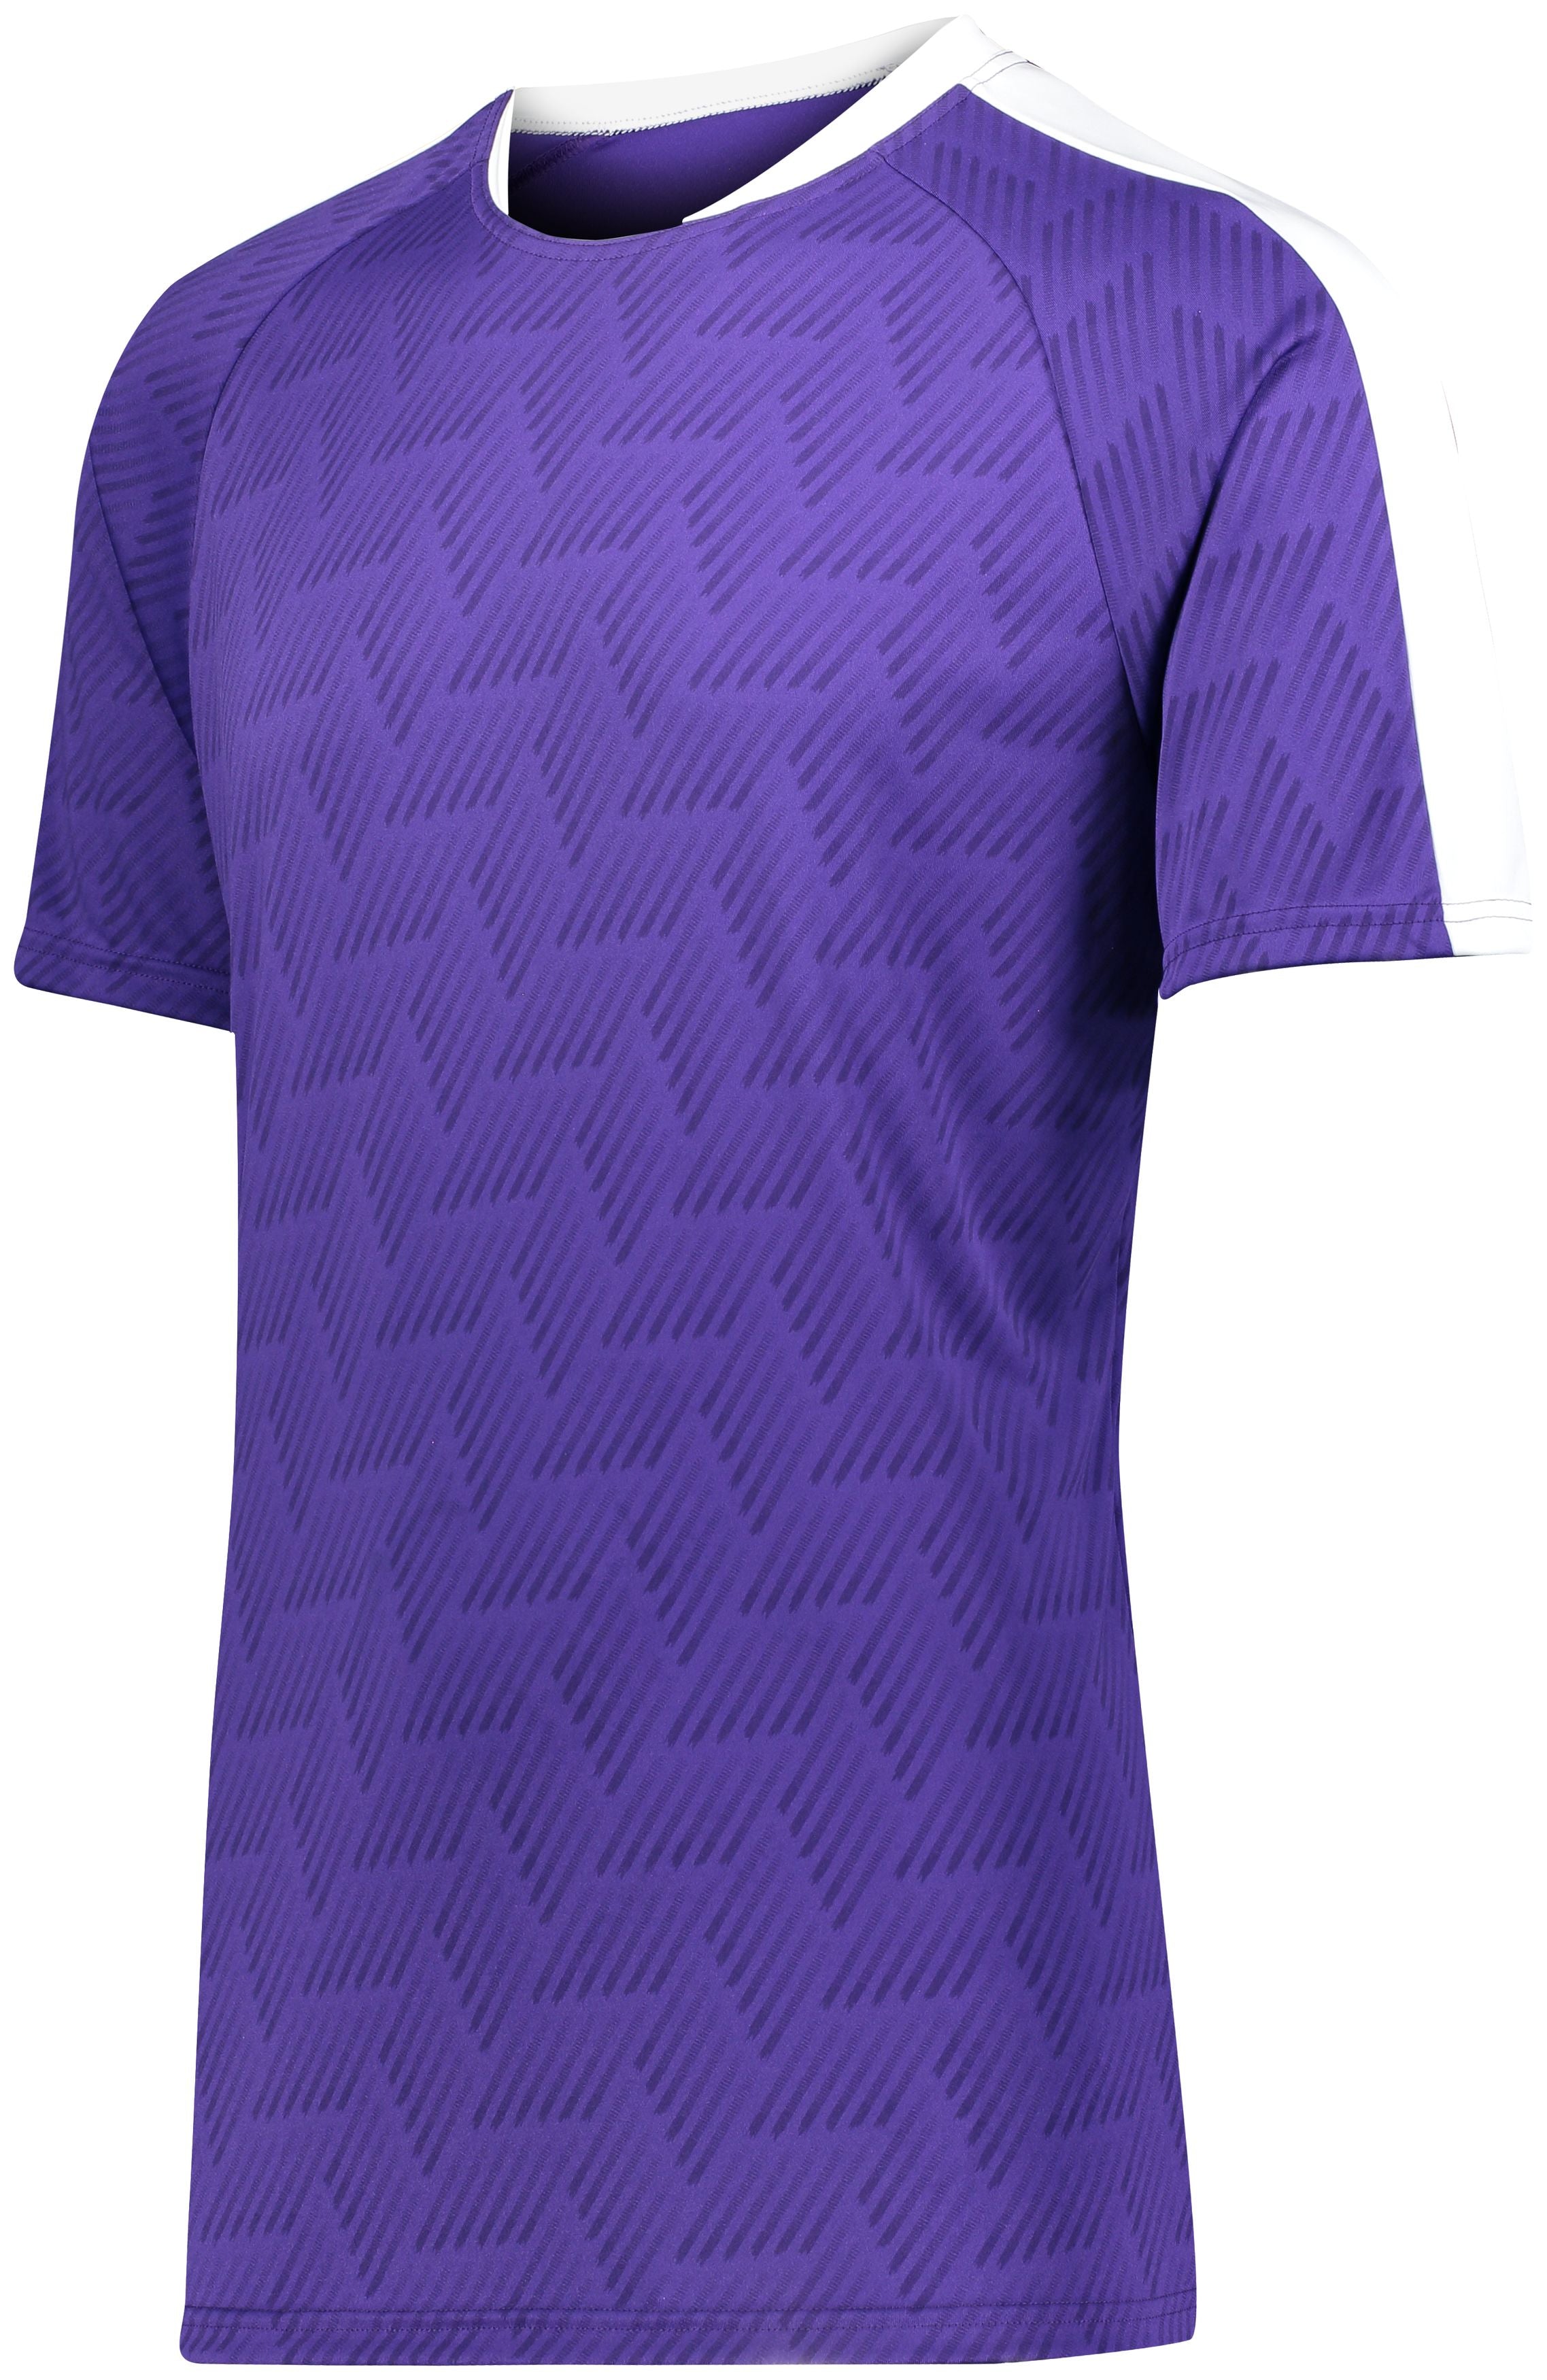 High 5 Hypervolt Jersey in Purple Print/White  -Part of the Adult, Adult-Jersey, High5-Products, Soccer, Shirts, All-Sports-1 product lines at KanaleyCreations.com